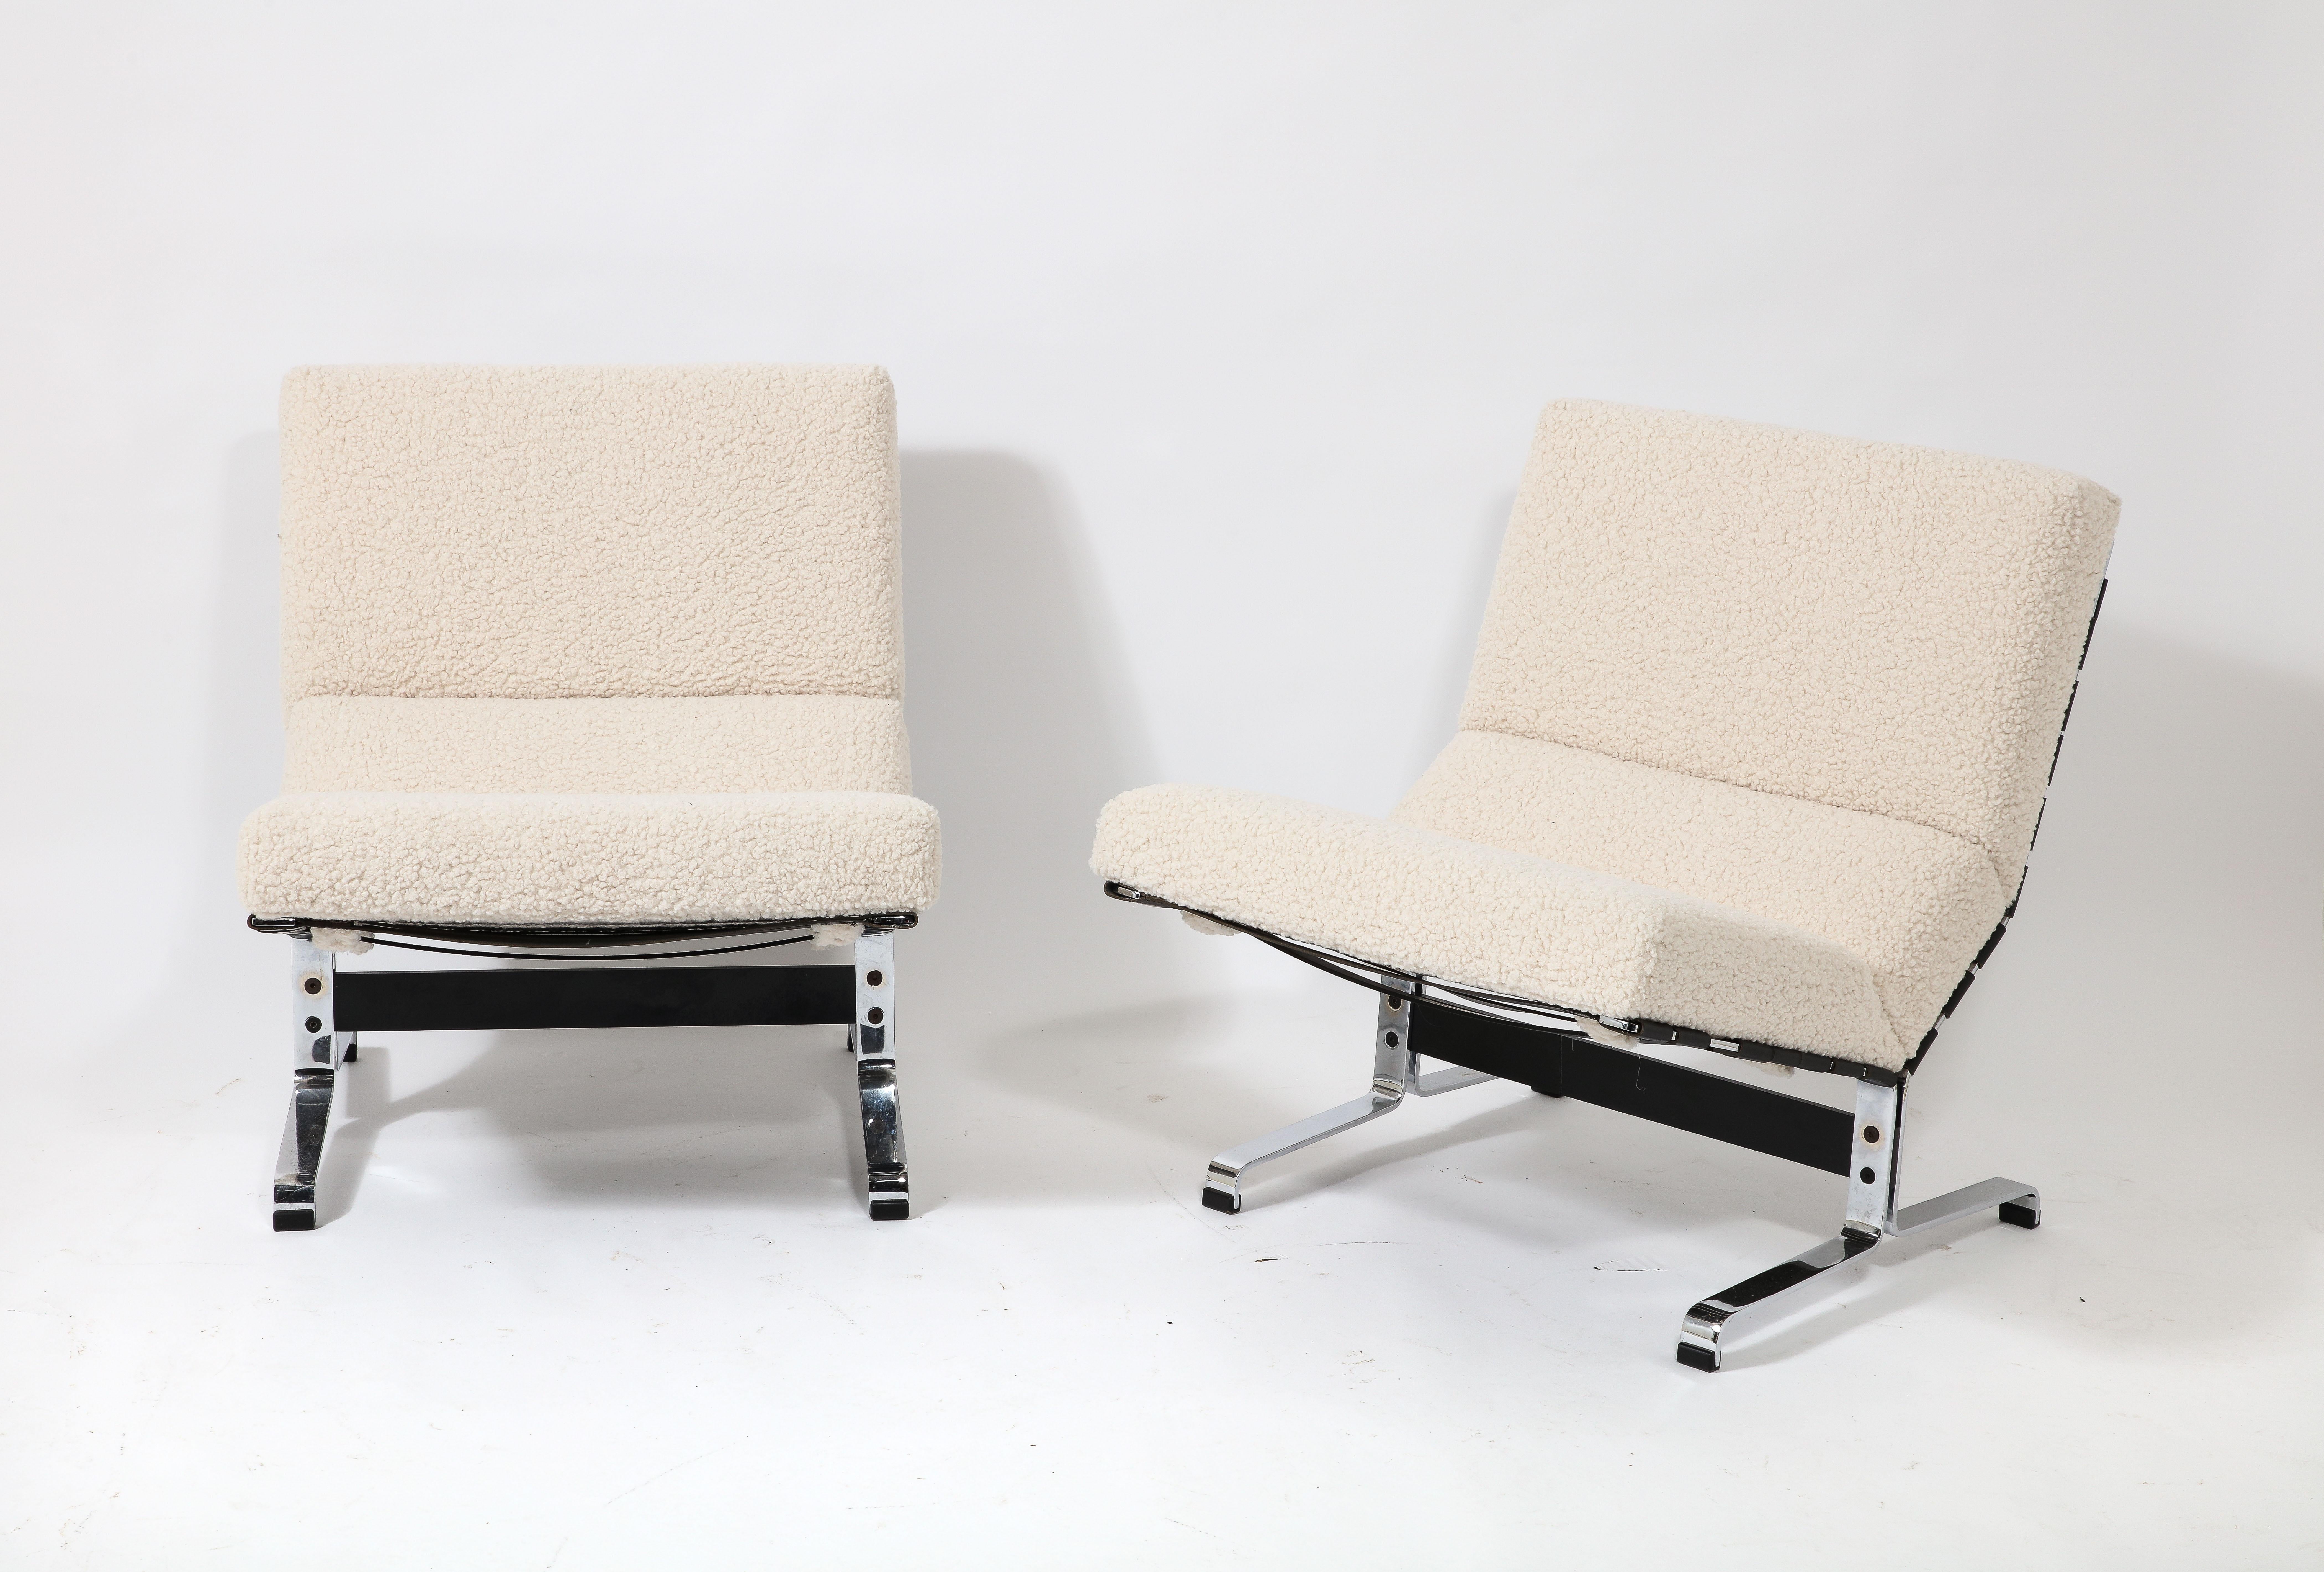 Etienne Fermigier Pair of Slipper Lounge Chairs in Cream, France 1960's For Sale 8